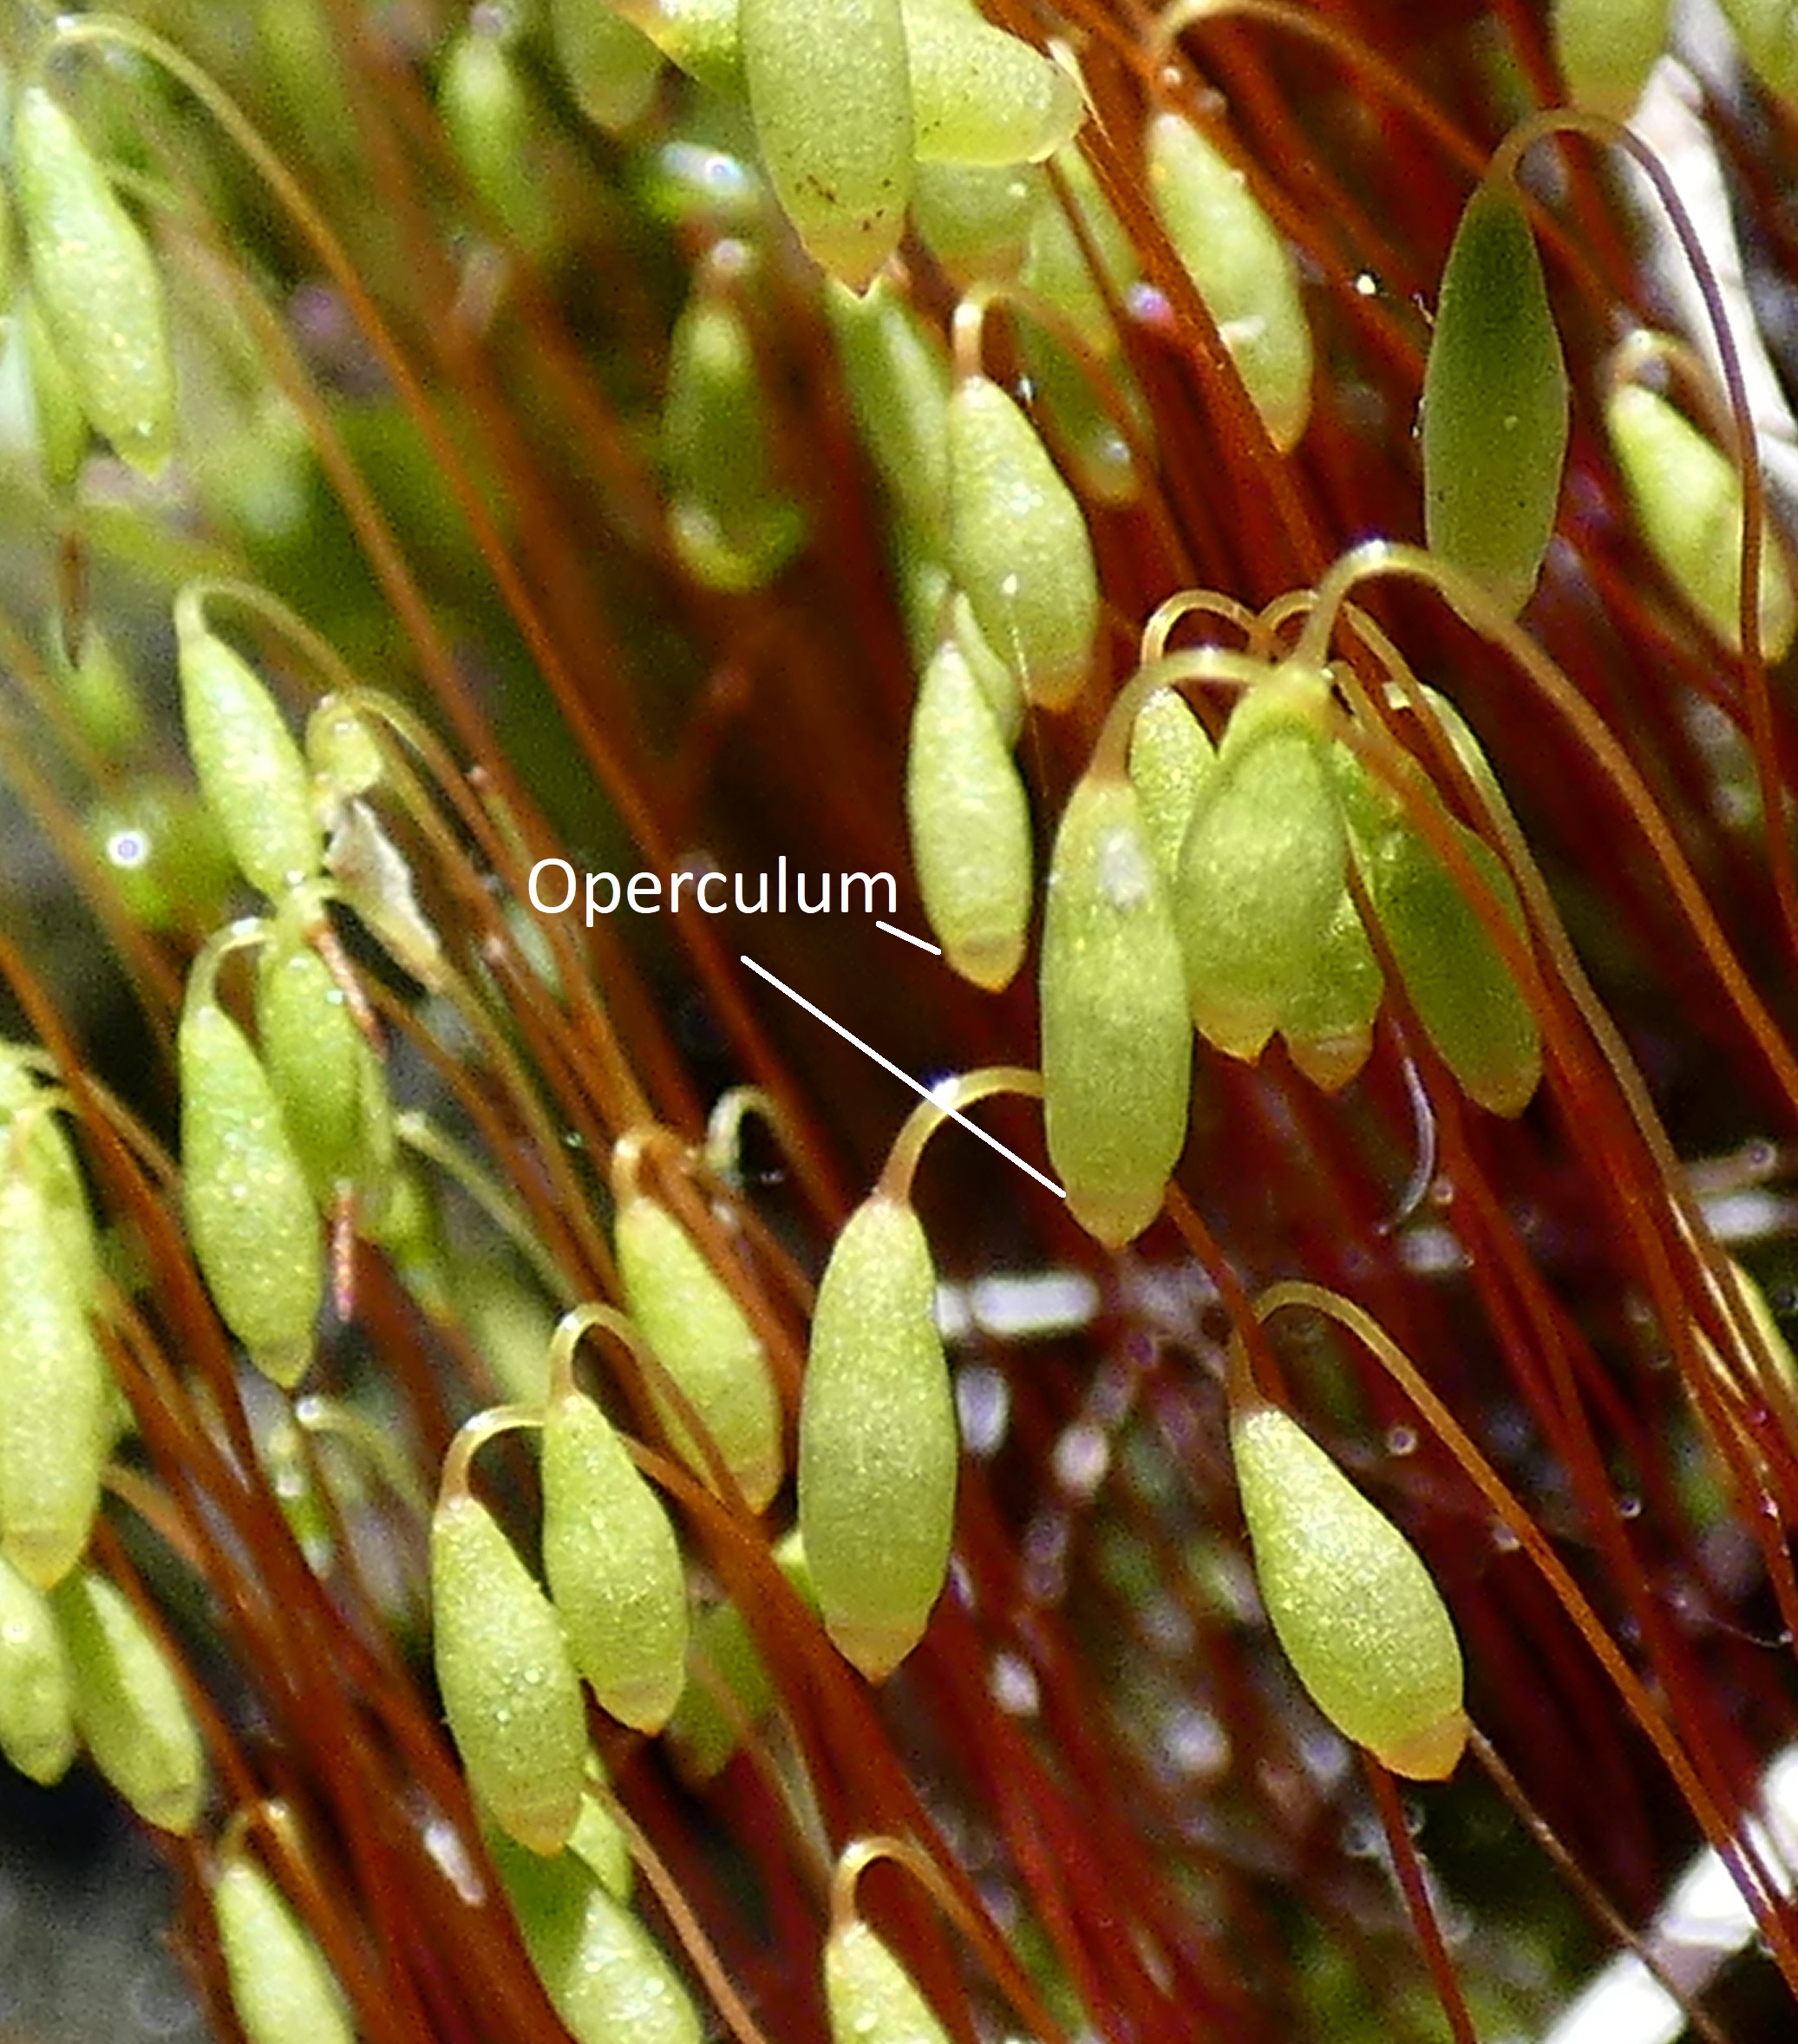 Moss sporophytes without calyptras, showing the operculum of each